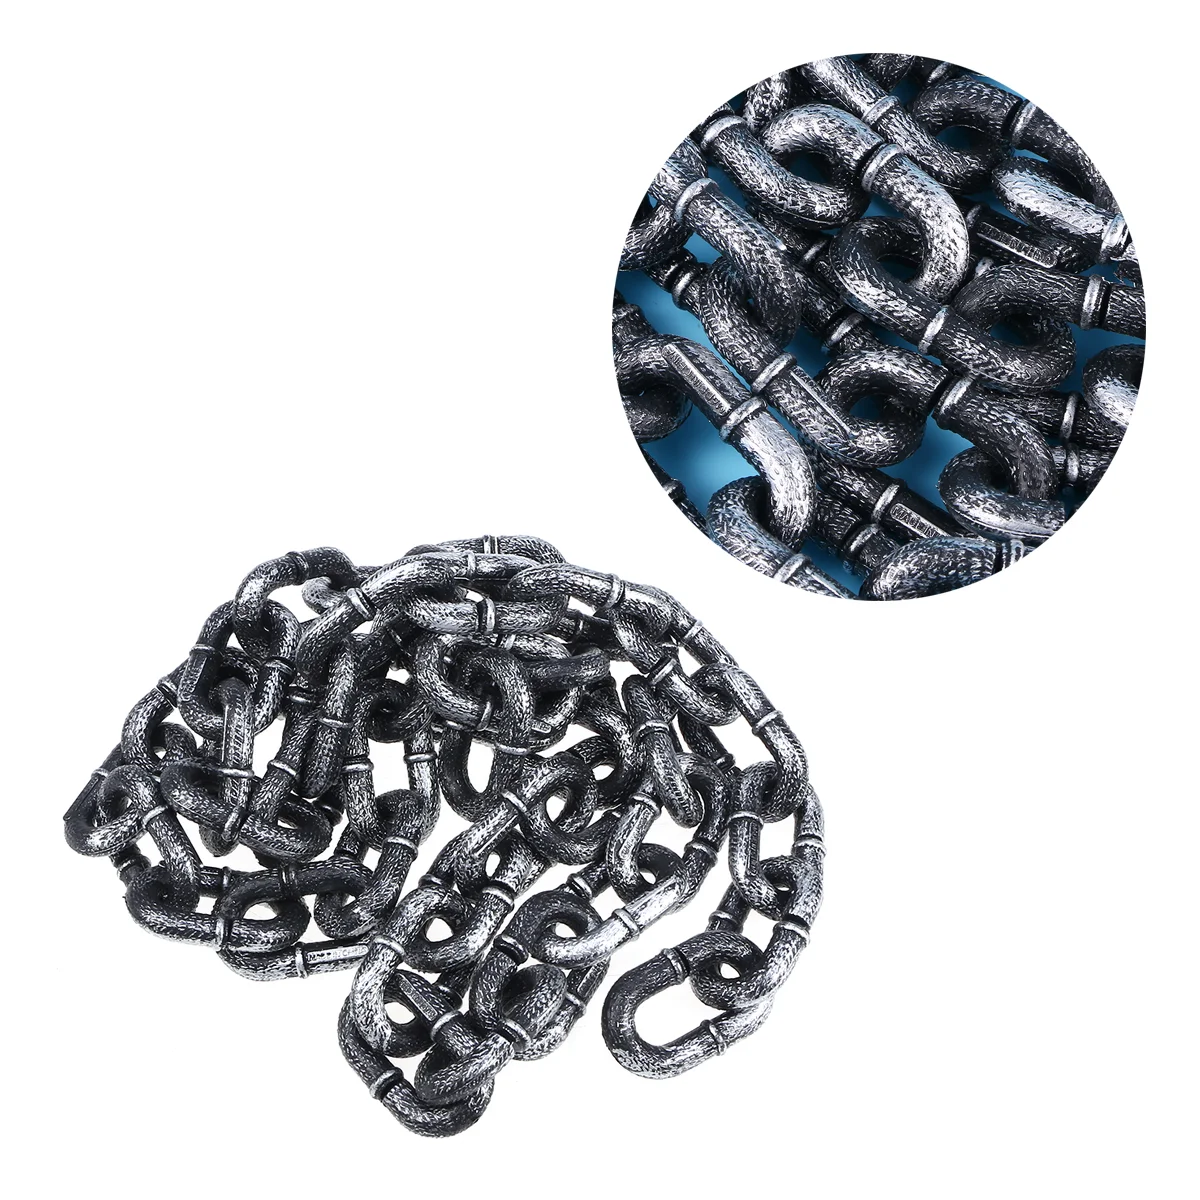 1pc 1M Chain Links for Kids Halloween Chains Black Chain Chain Chains Props Chains